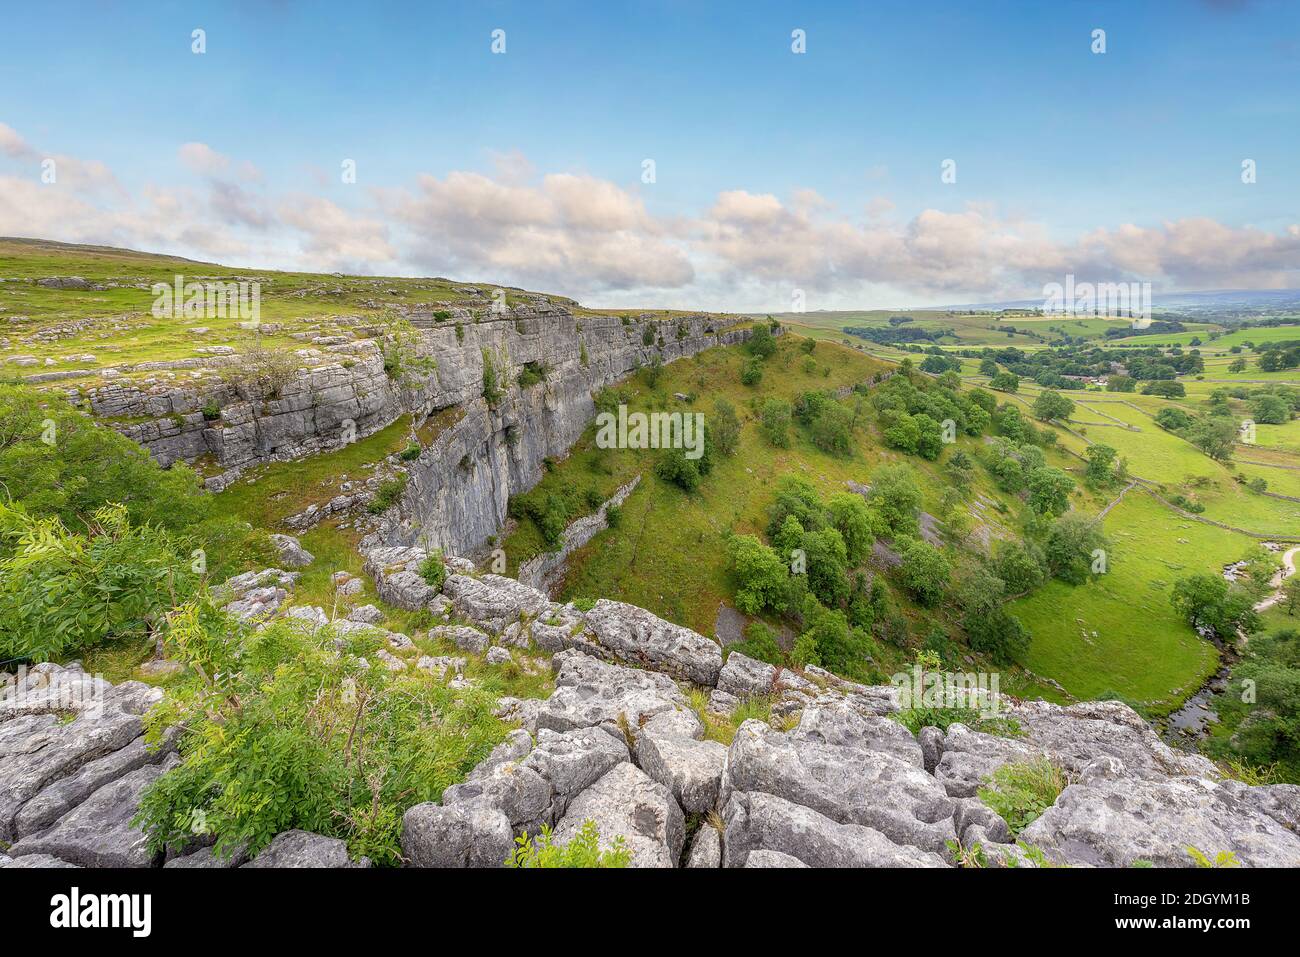 A view from the top of Malham Cove, Yorkshire Dales National Park, Yorkshire, UK Stock Photo